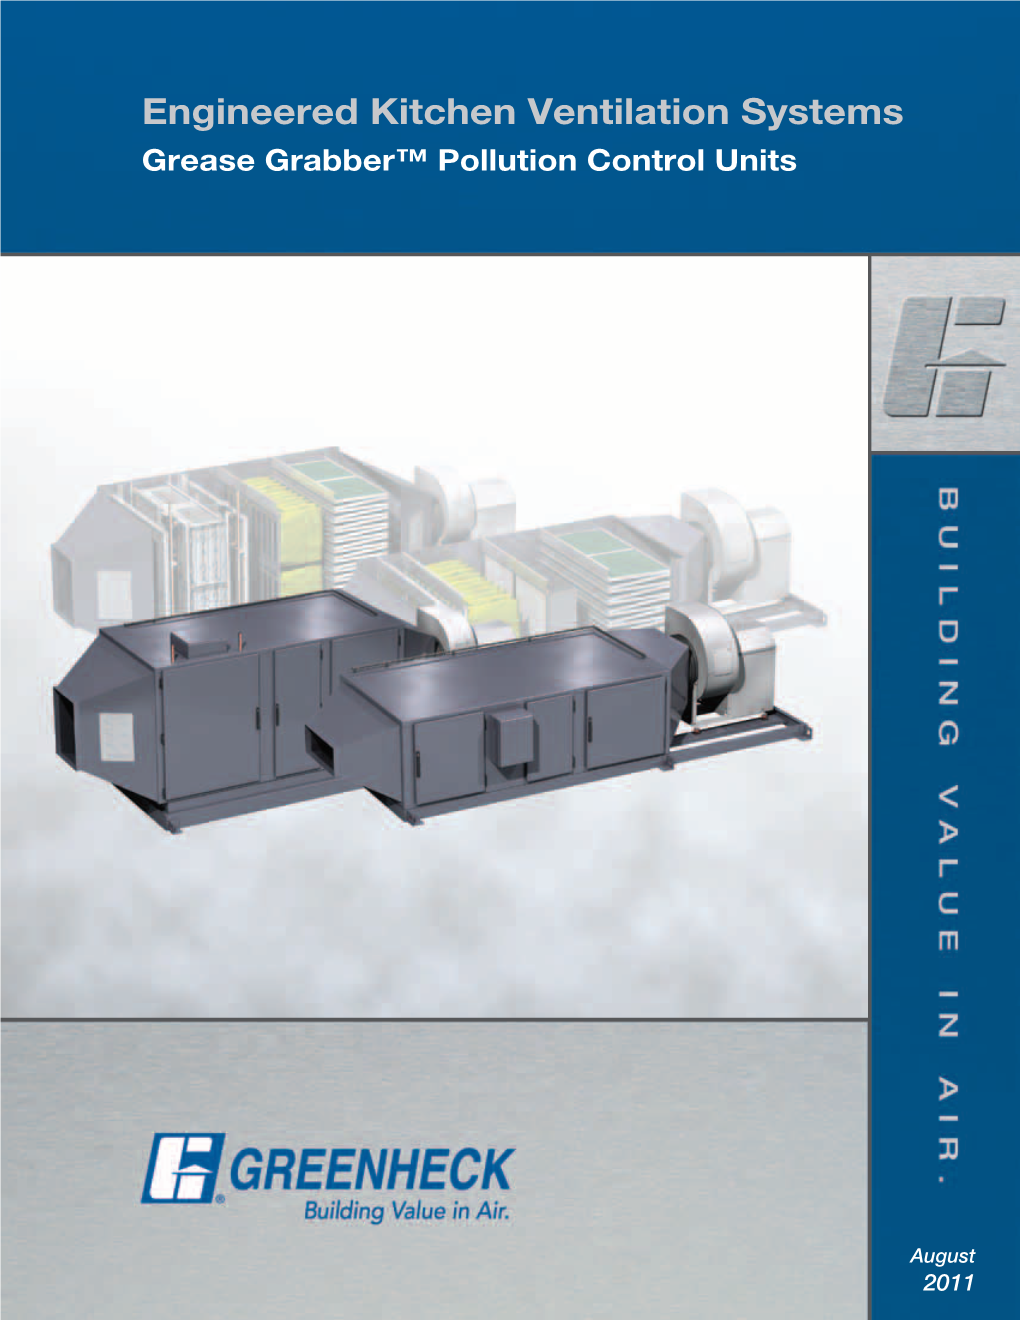 Engineered Kitchen Ventilation Systems Grease Grabber™ Pollution Control Units